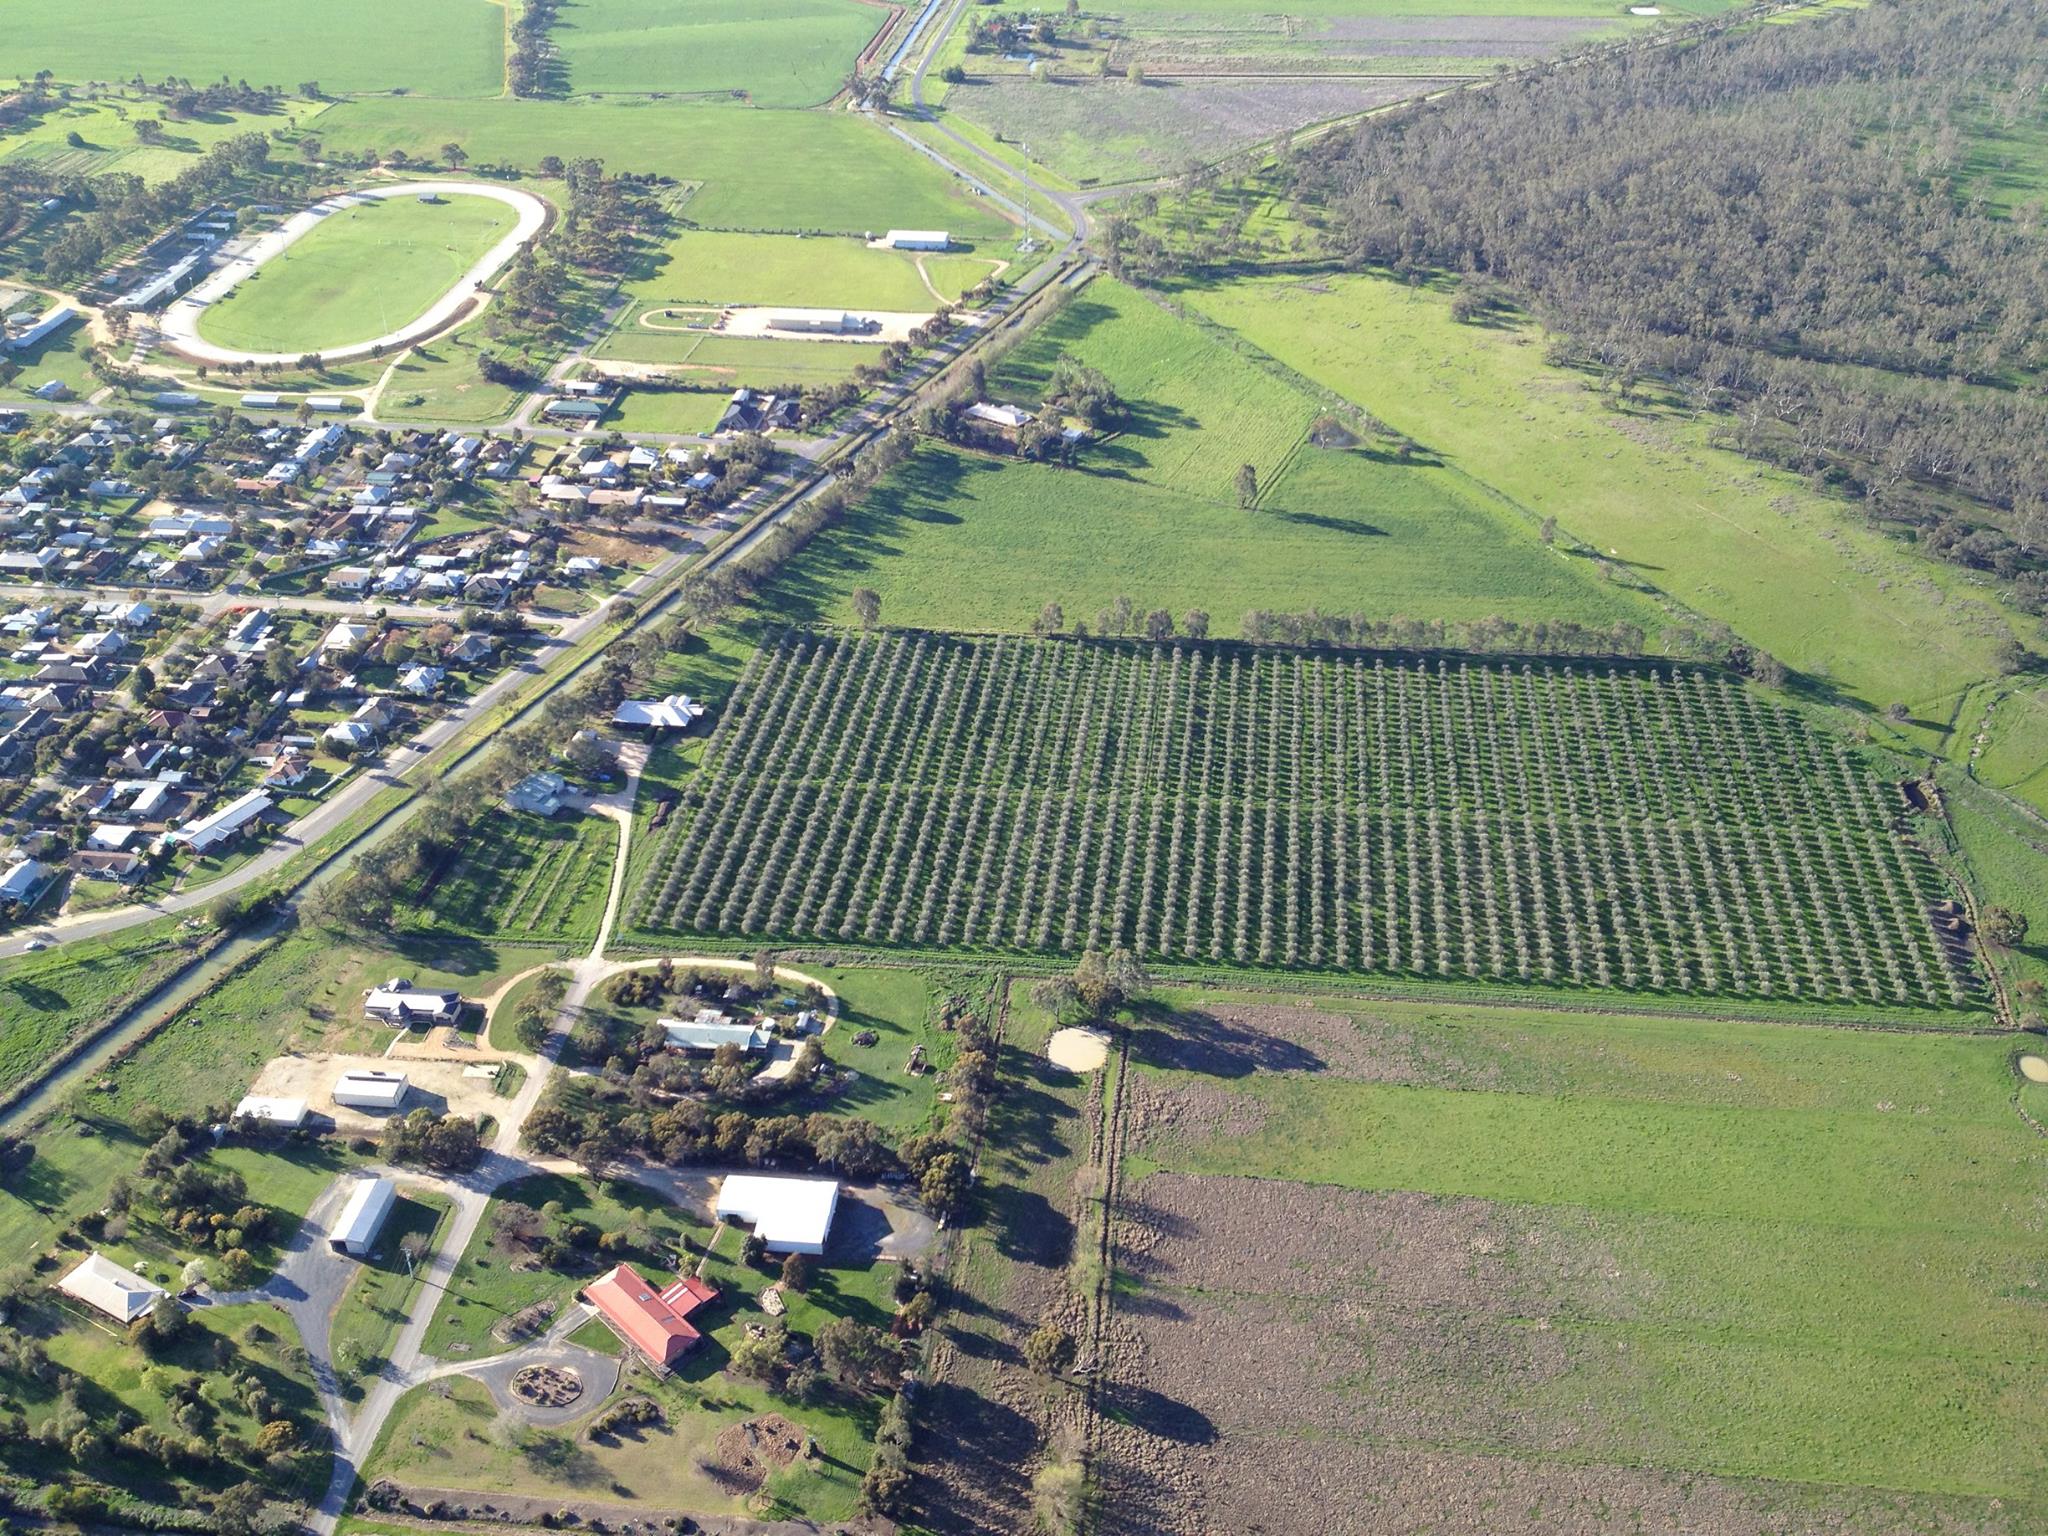 Aerial view of Salute Oliva olive grove